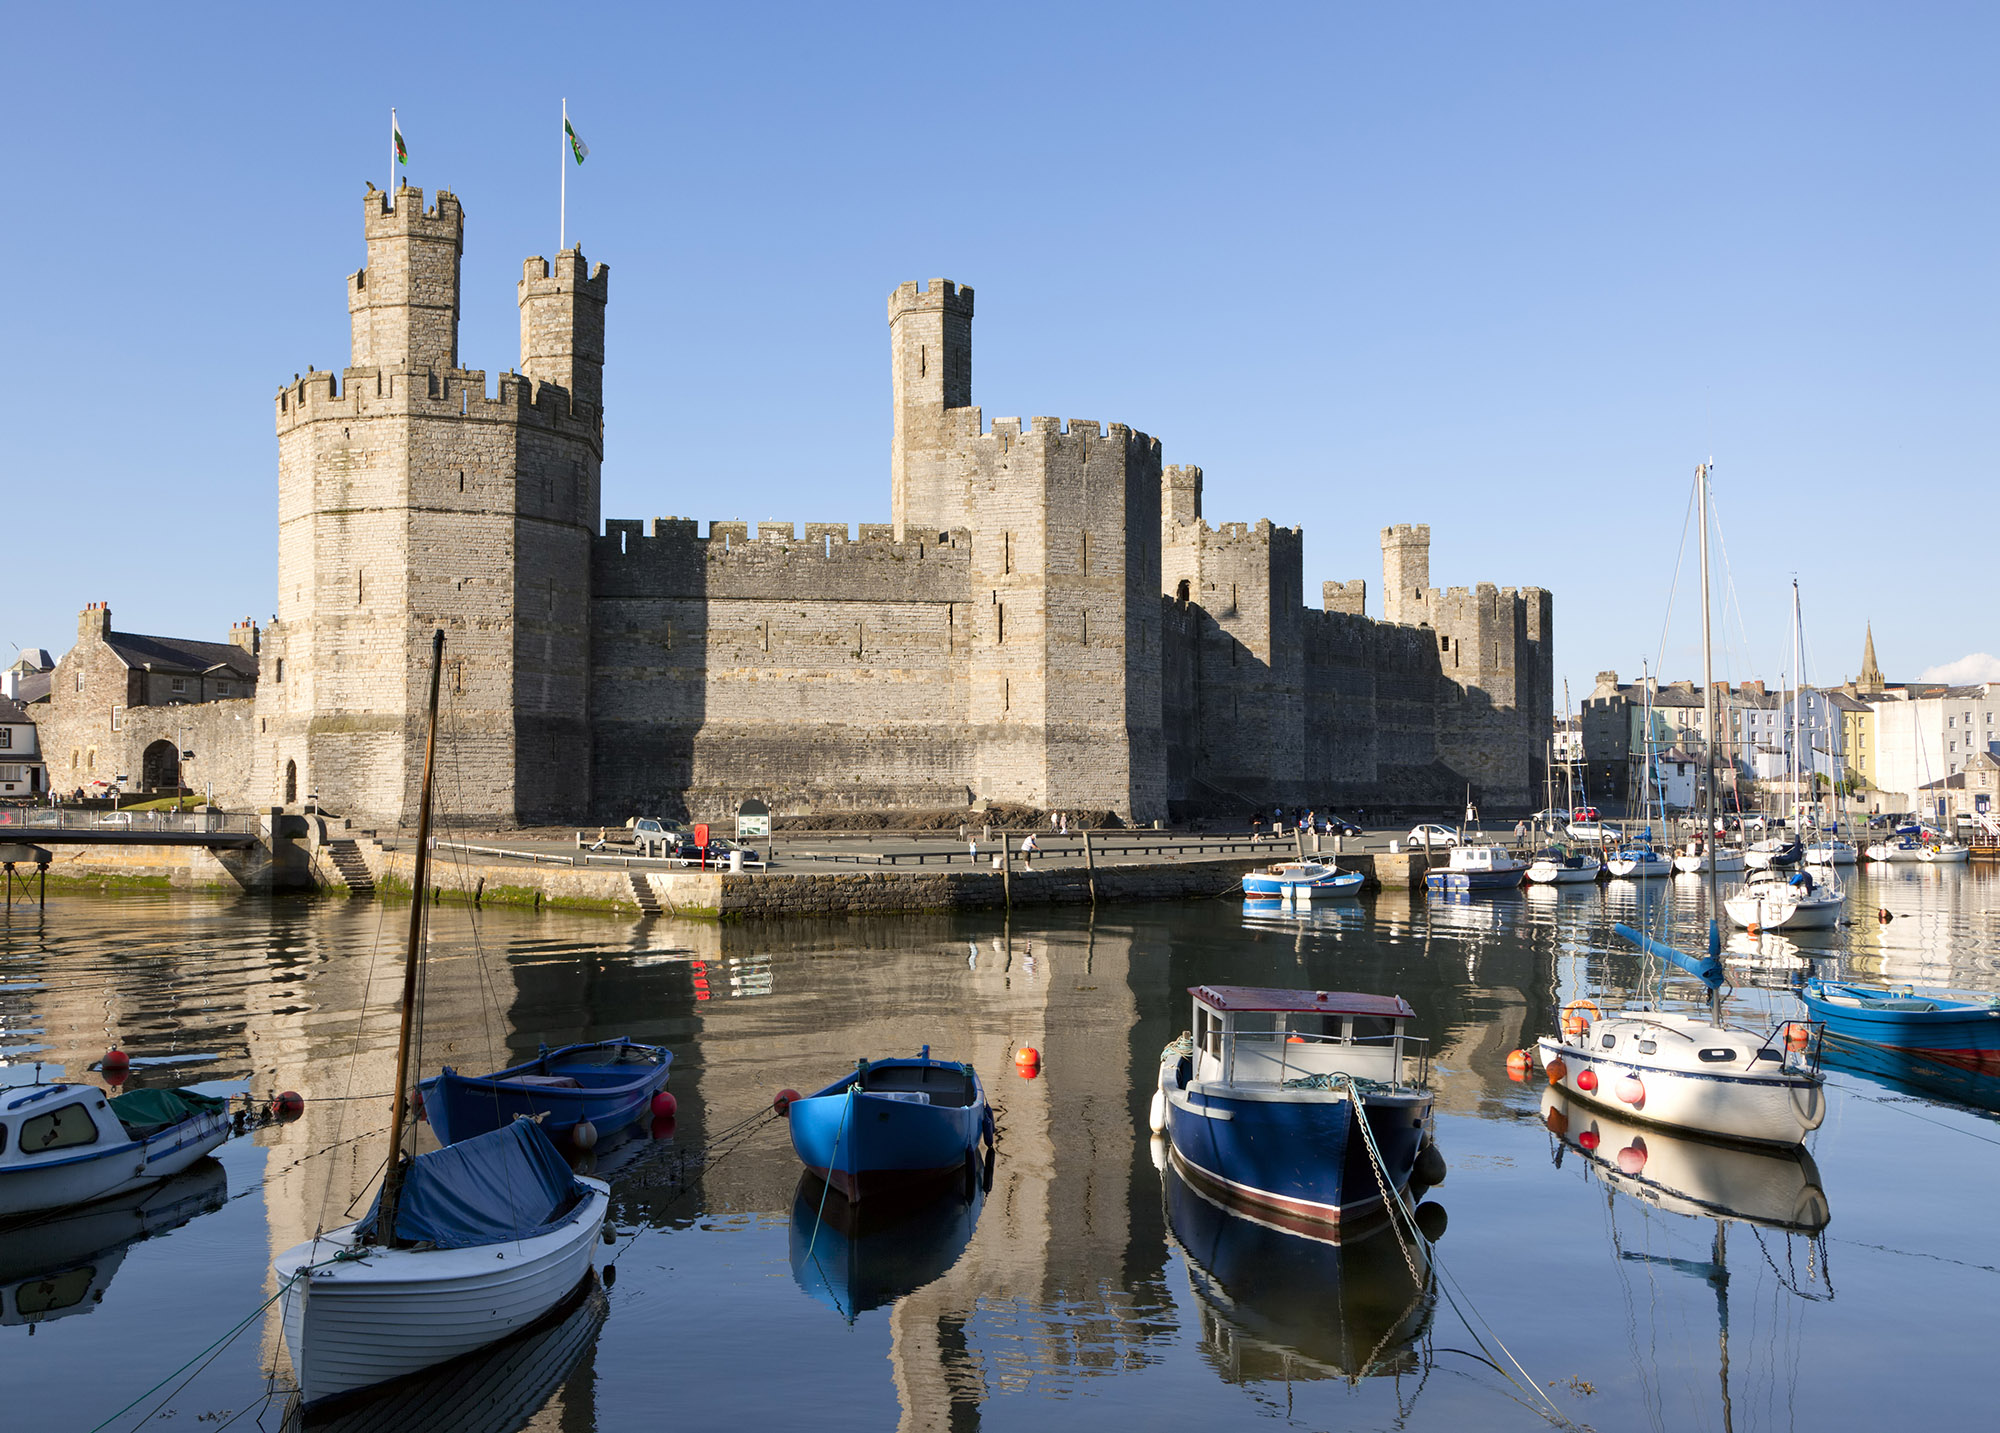 View of Caernarfon Castle from across the river